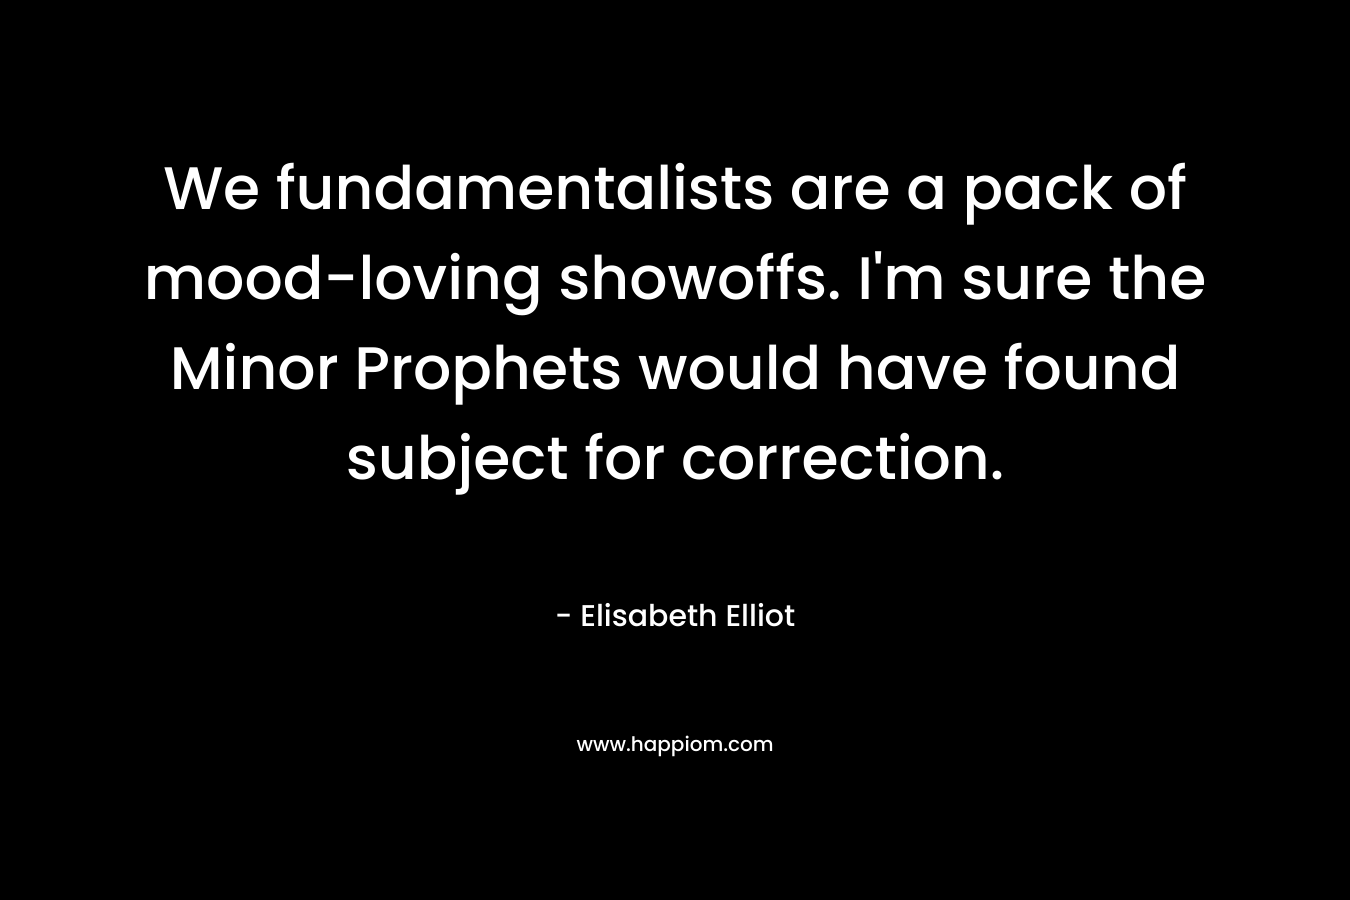 We fundamentalists are a pack of mood-loving showoffs. I’m sure the Minor Prophets would have found subject for correction. – Elisabeth Elliot